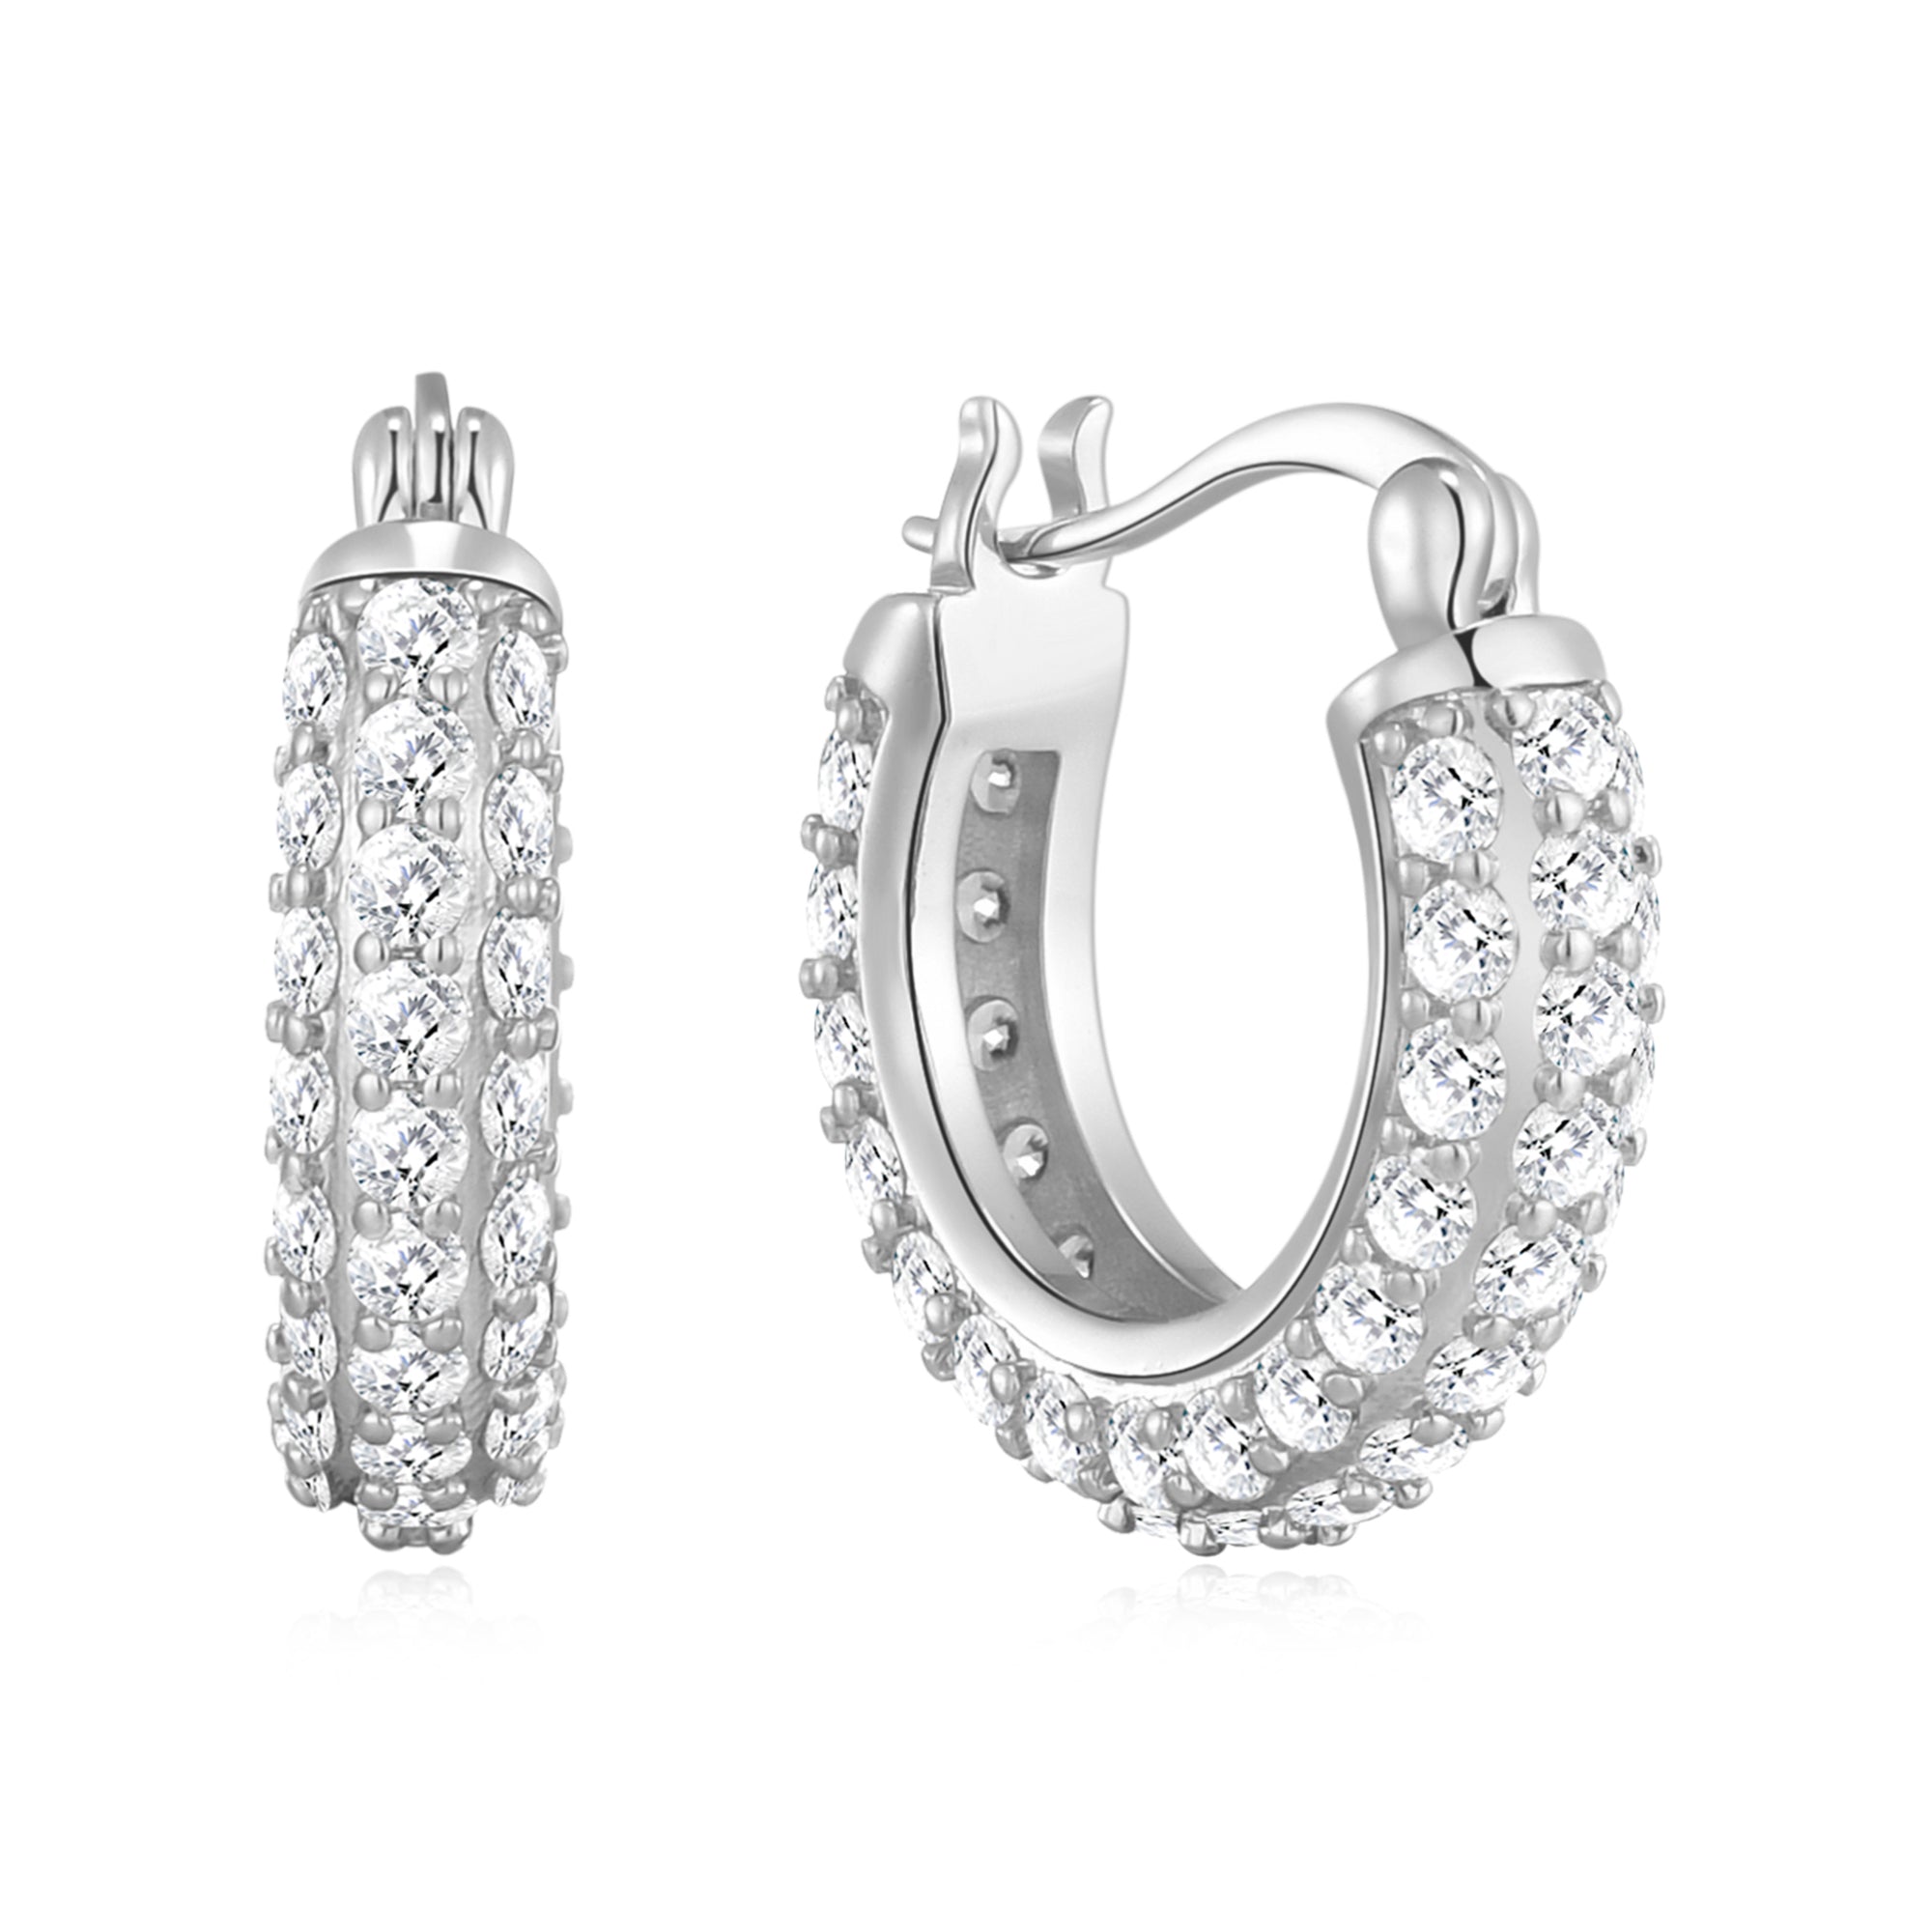 Silver Plated 20mm Pave Hoop Earrings Created with Zircondia® Crystals by Philip Jones Jewellery